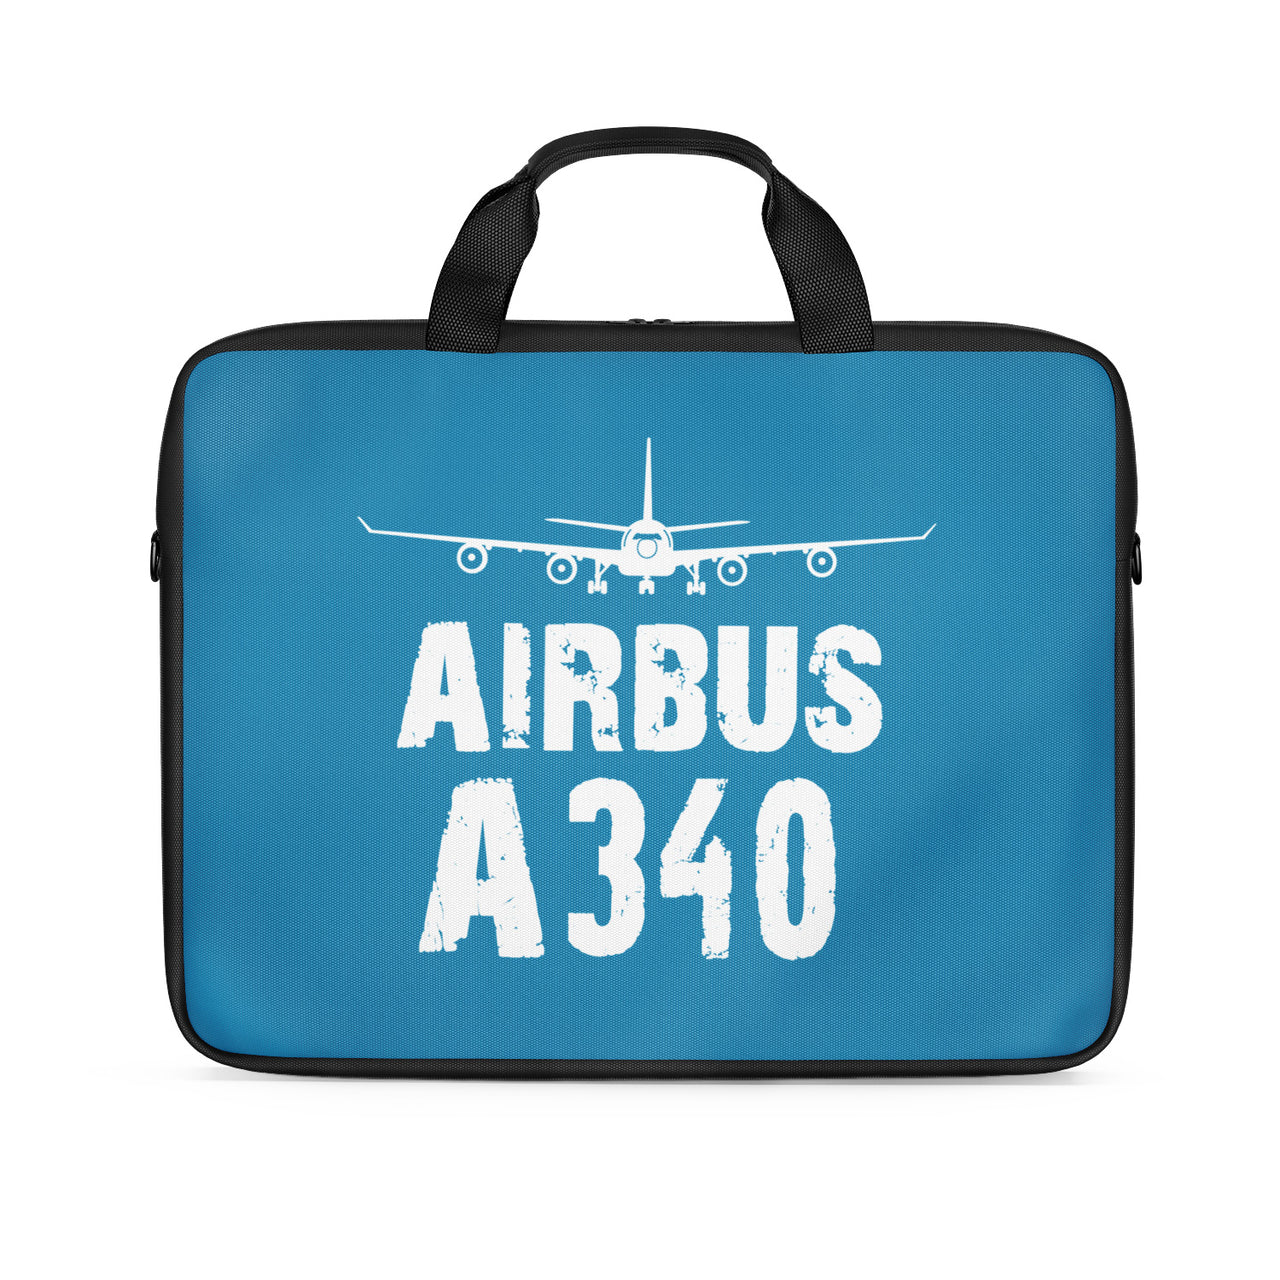 Airbus A340 & Plane Designed Laptop & Tablet Bags